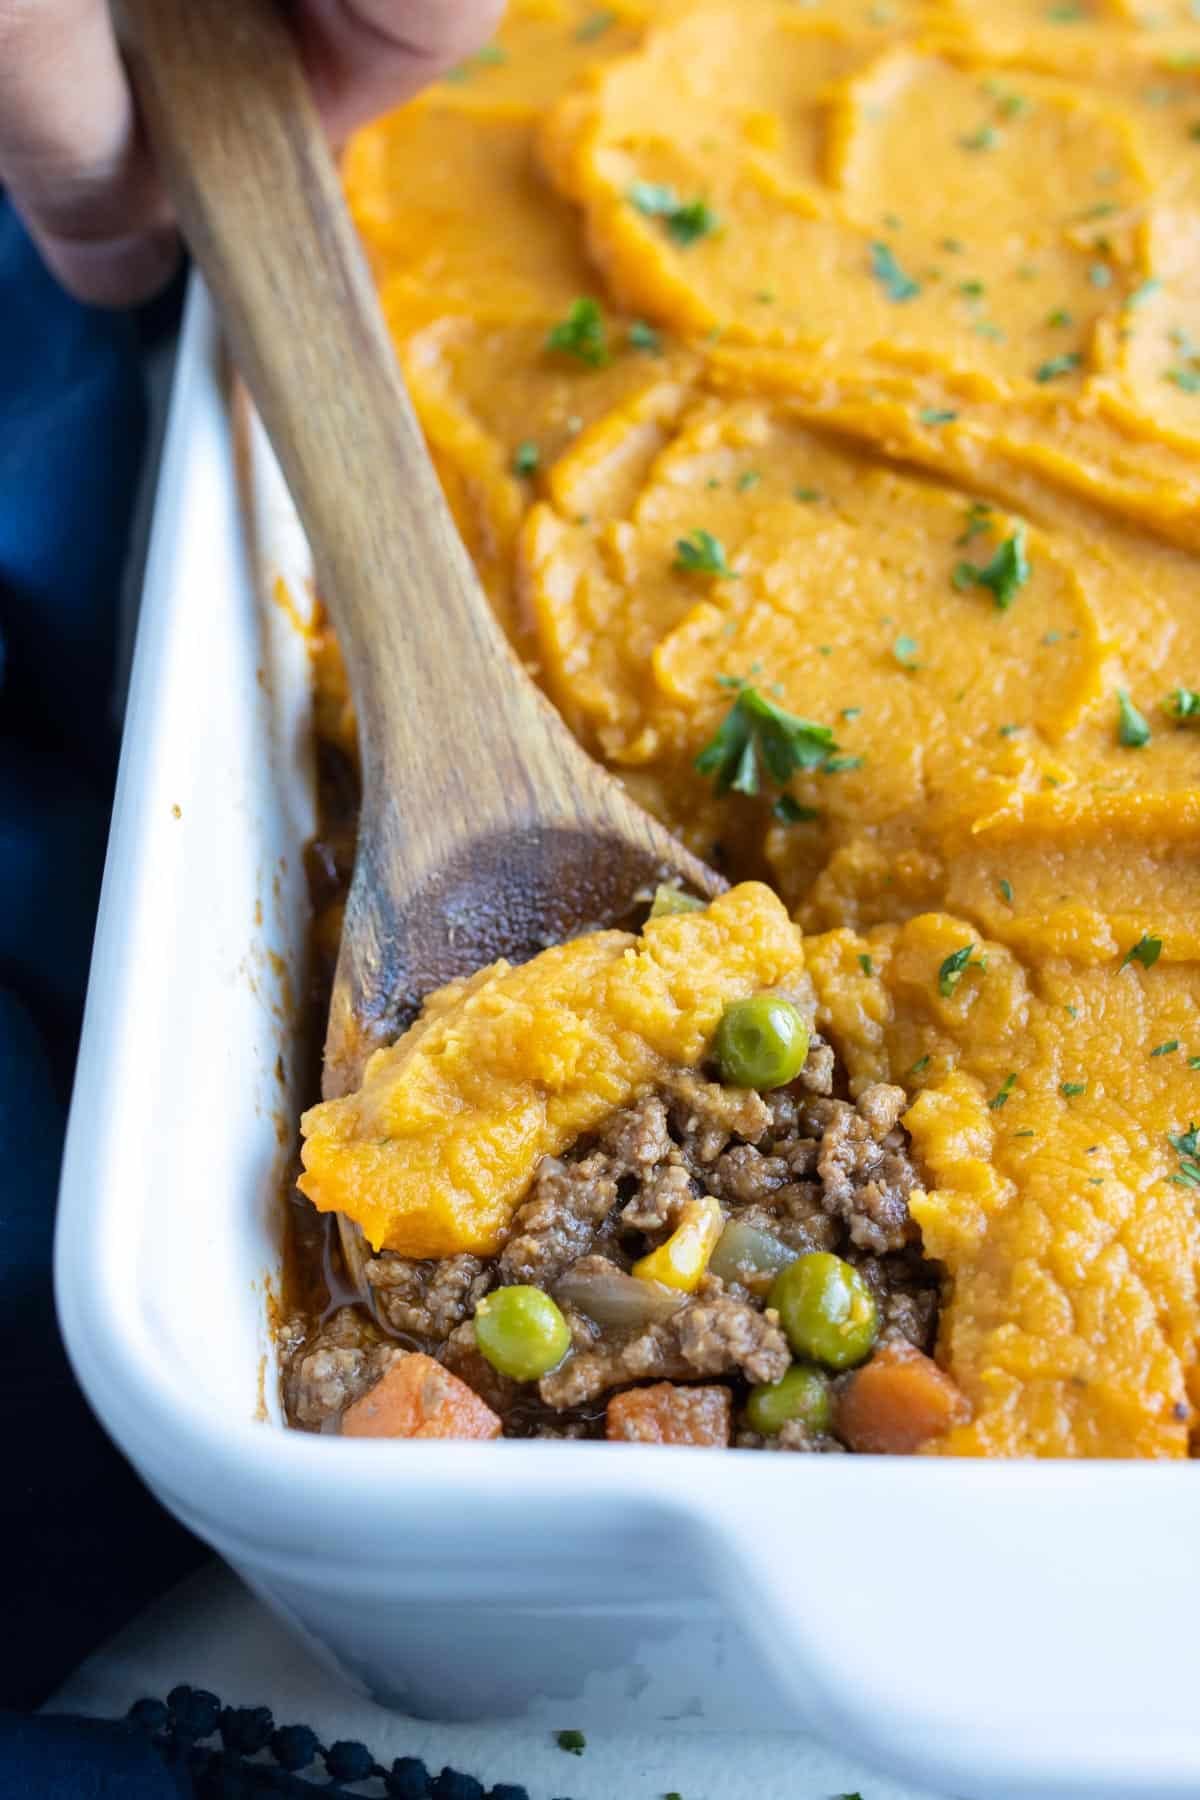 A baking dish of sweet potato shepherd's pie is served for dinner.